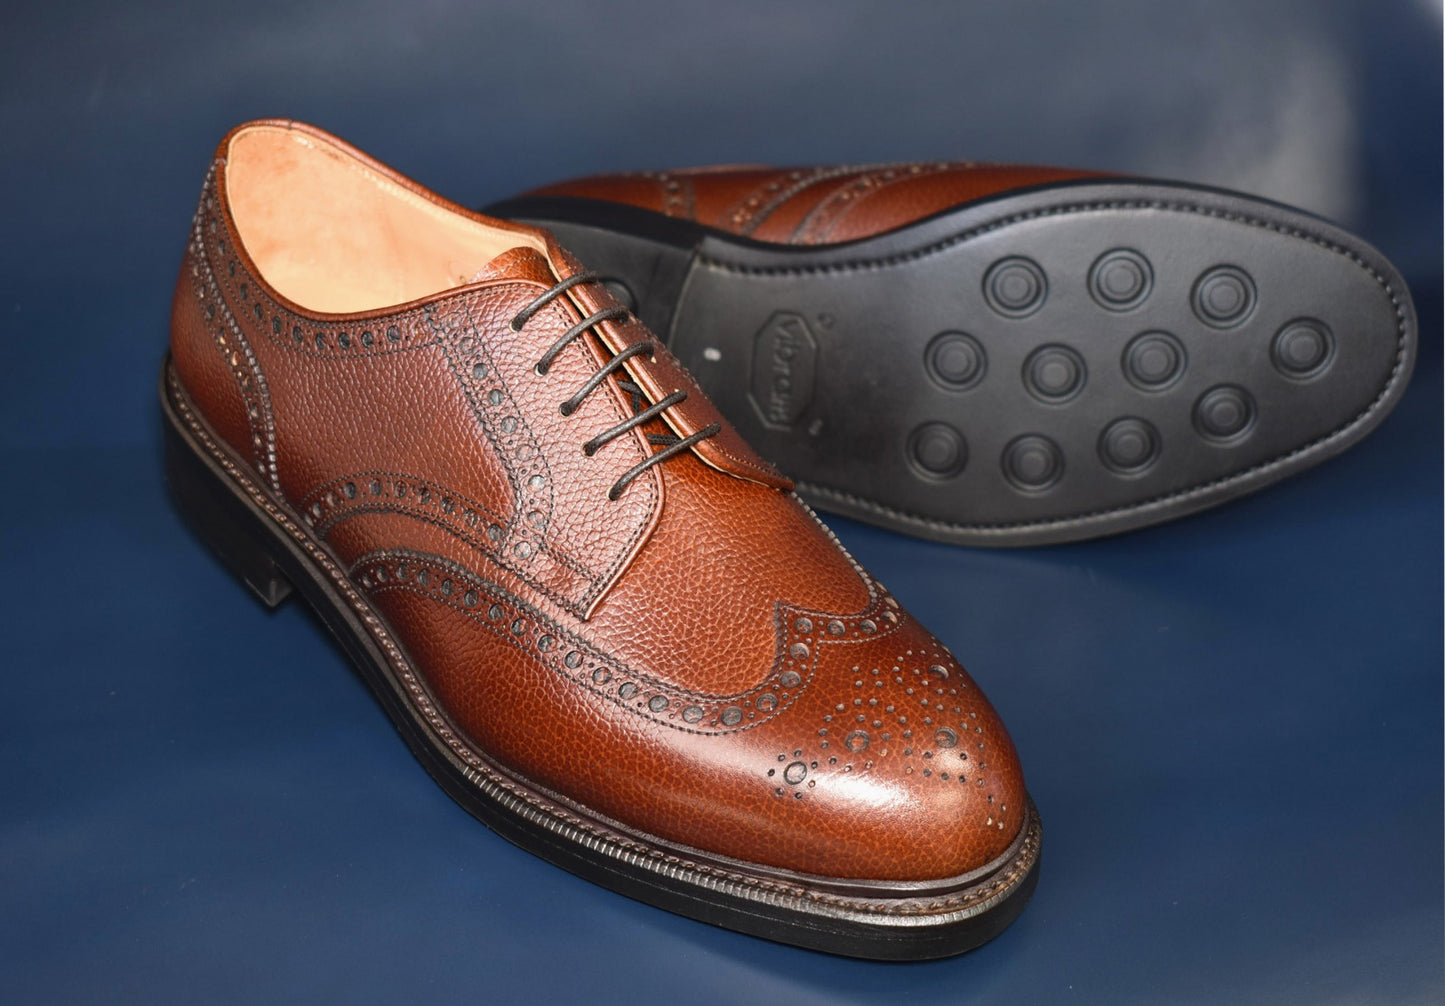 “OliverⅡ” Full brogue, Brown Dress Shoes, Annonay Longchamps, Goodyear welted, US size 5 1/2 ~ 10